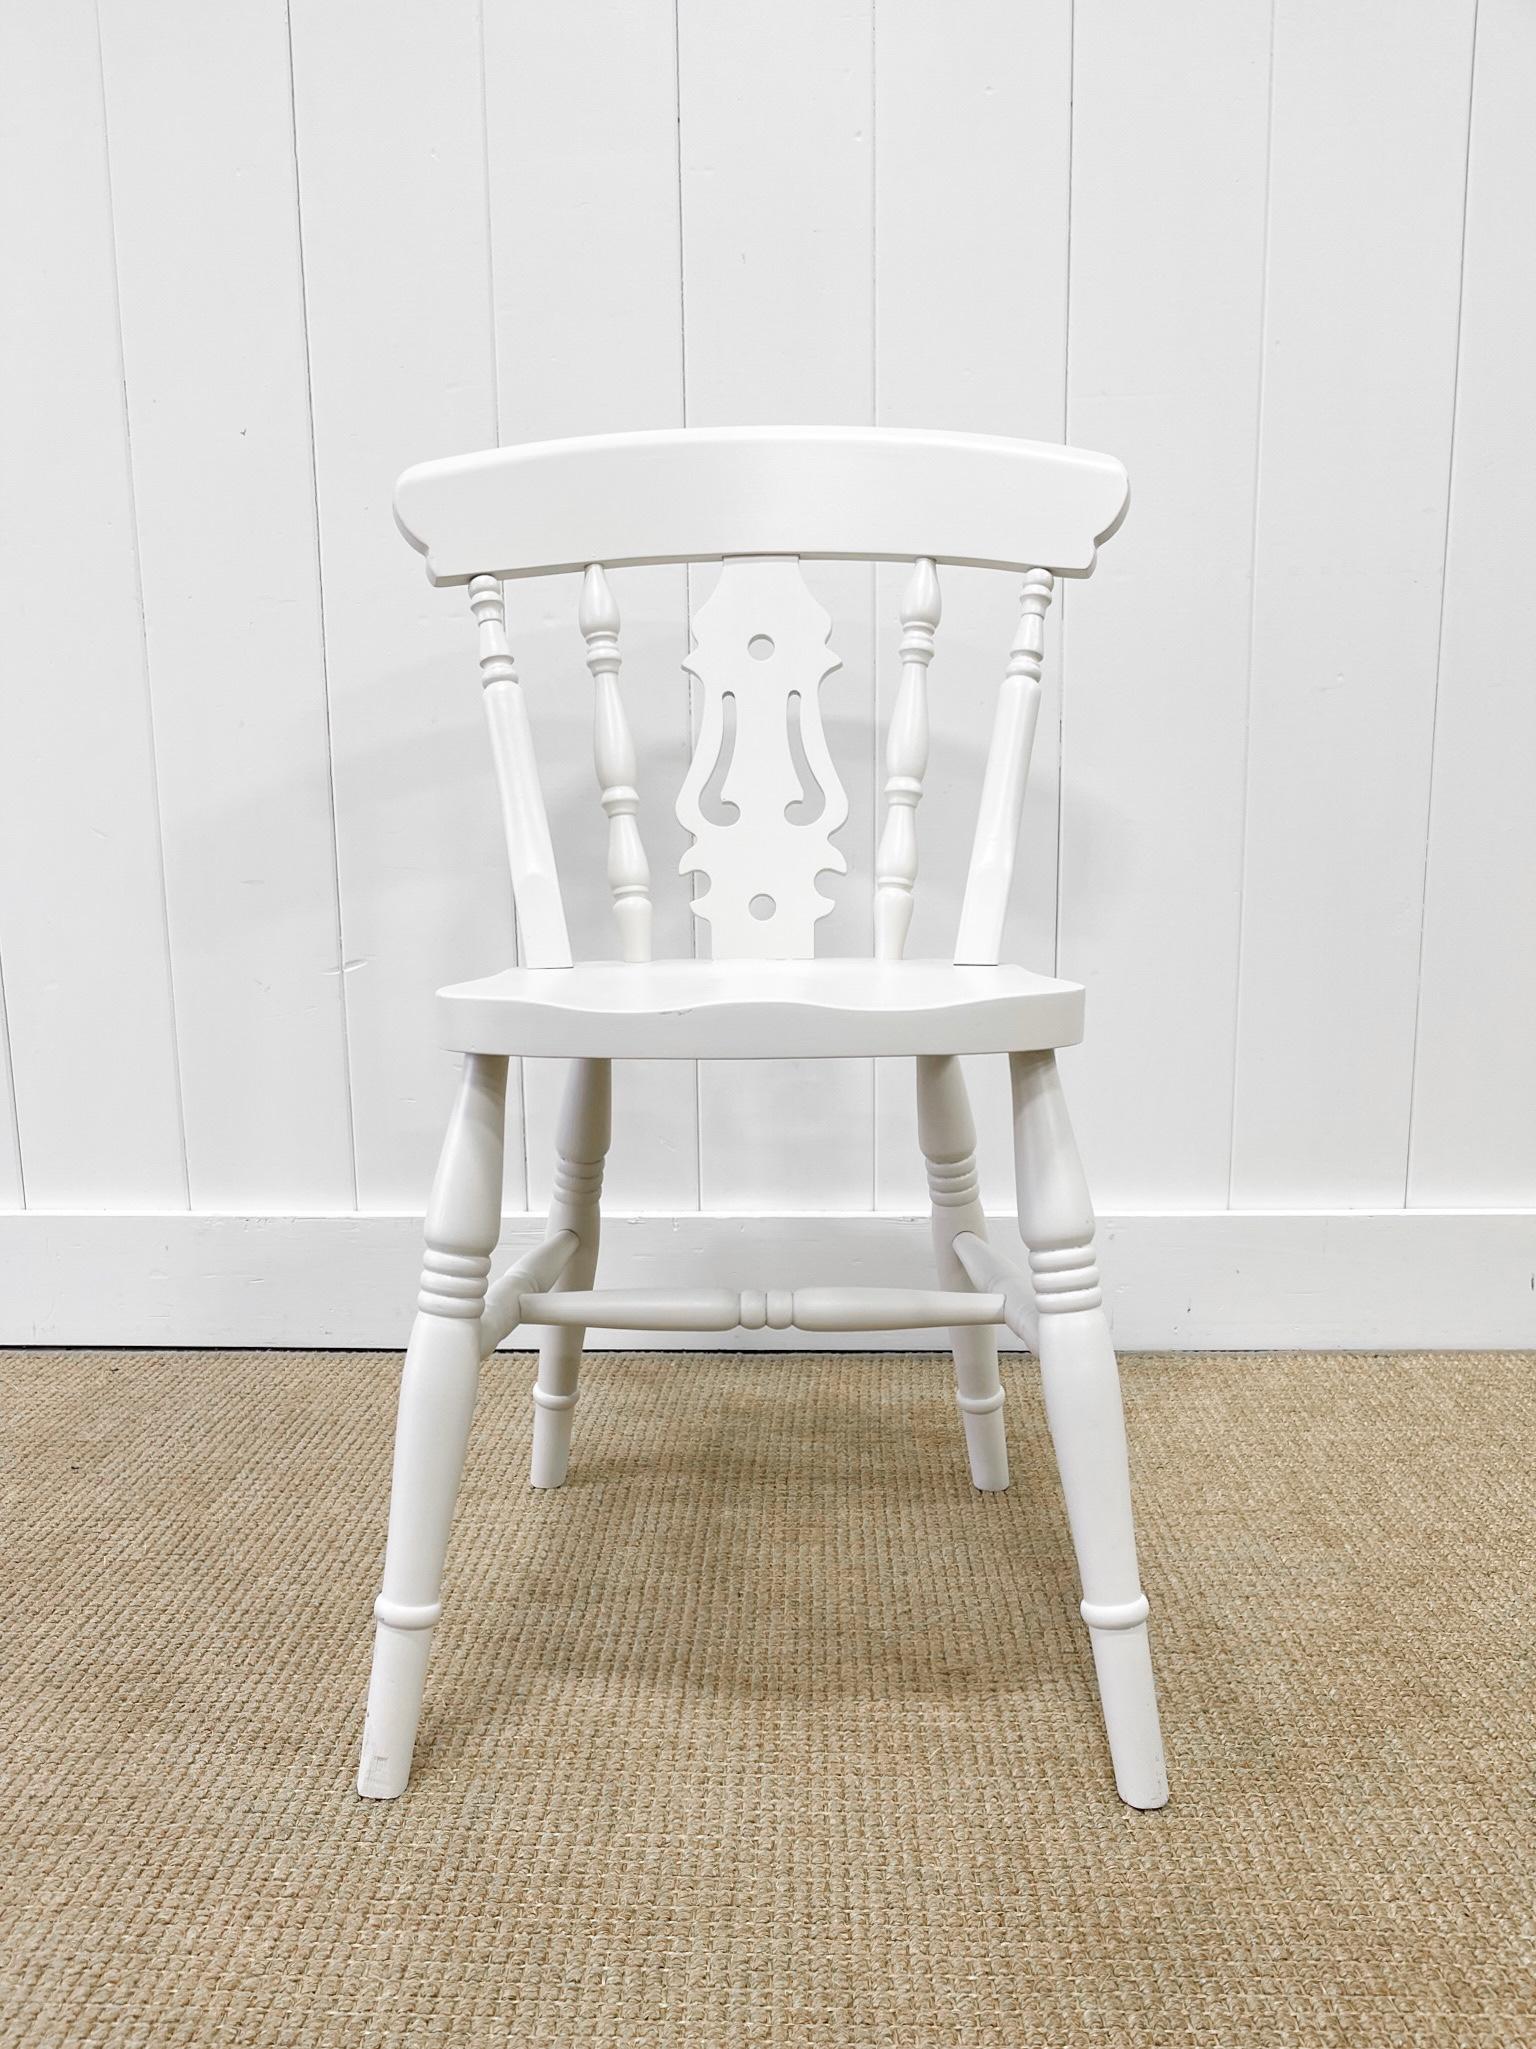 A Vintage Set of 4 White Fiddleback Back Chairs In Good Condition For Sale In Oak Park, MI